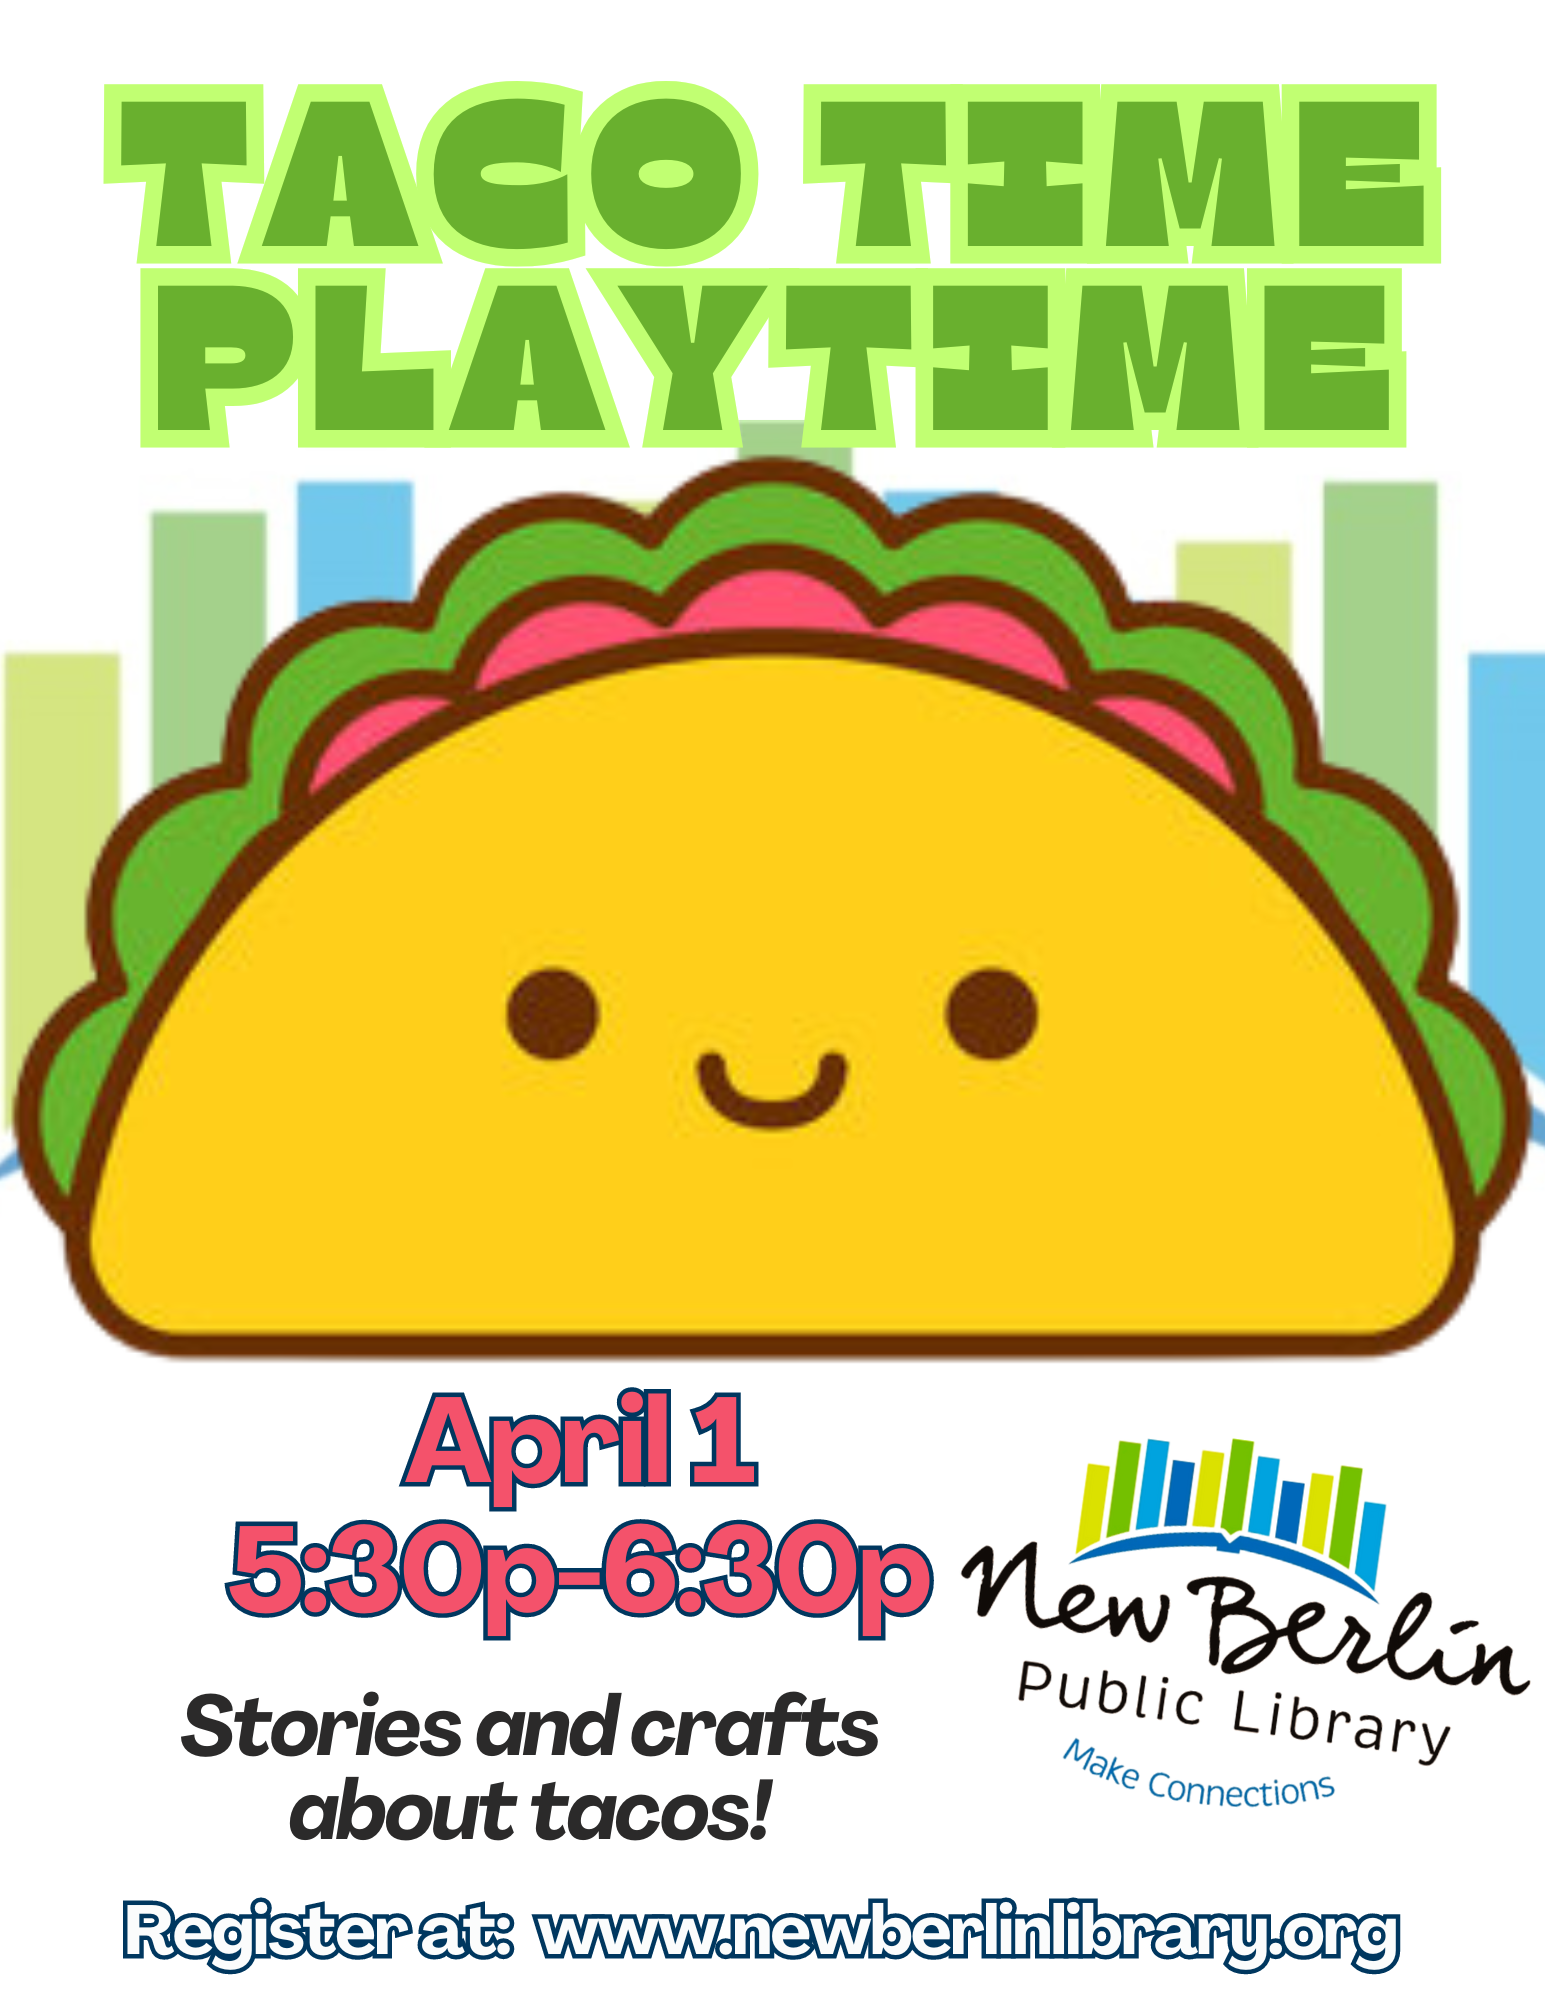 Taco Time Playtime on April 1 from 5:30 PM to 6:30 PM. Register online!